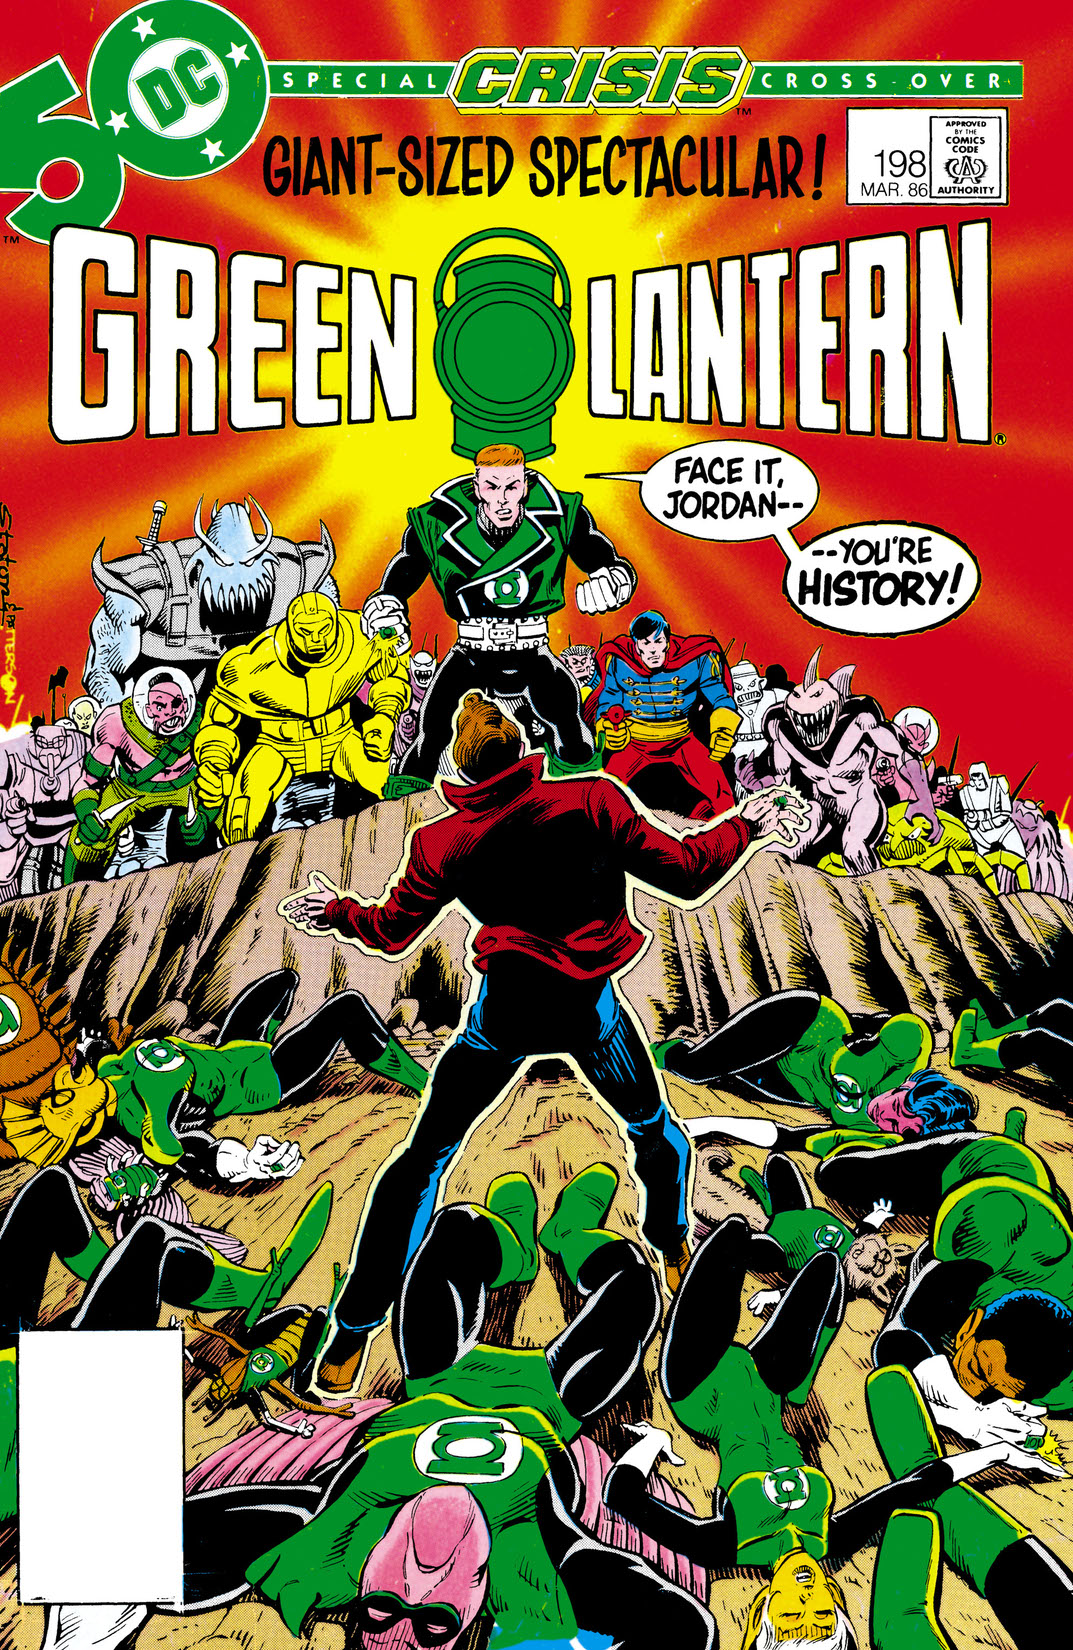 Green Lantern (1960-) #198 preview images